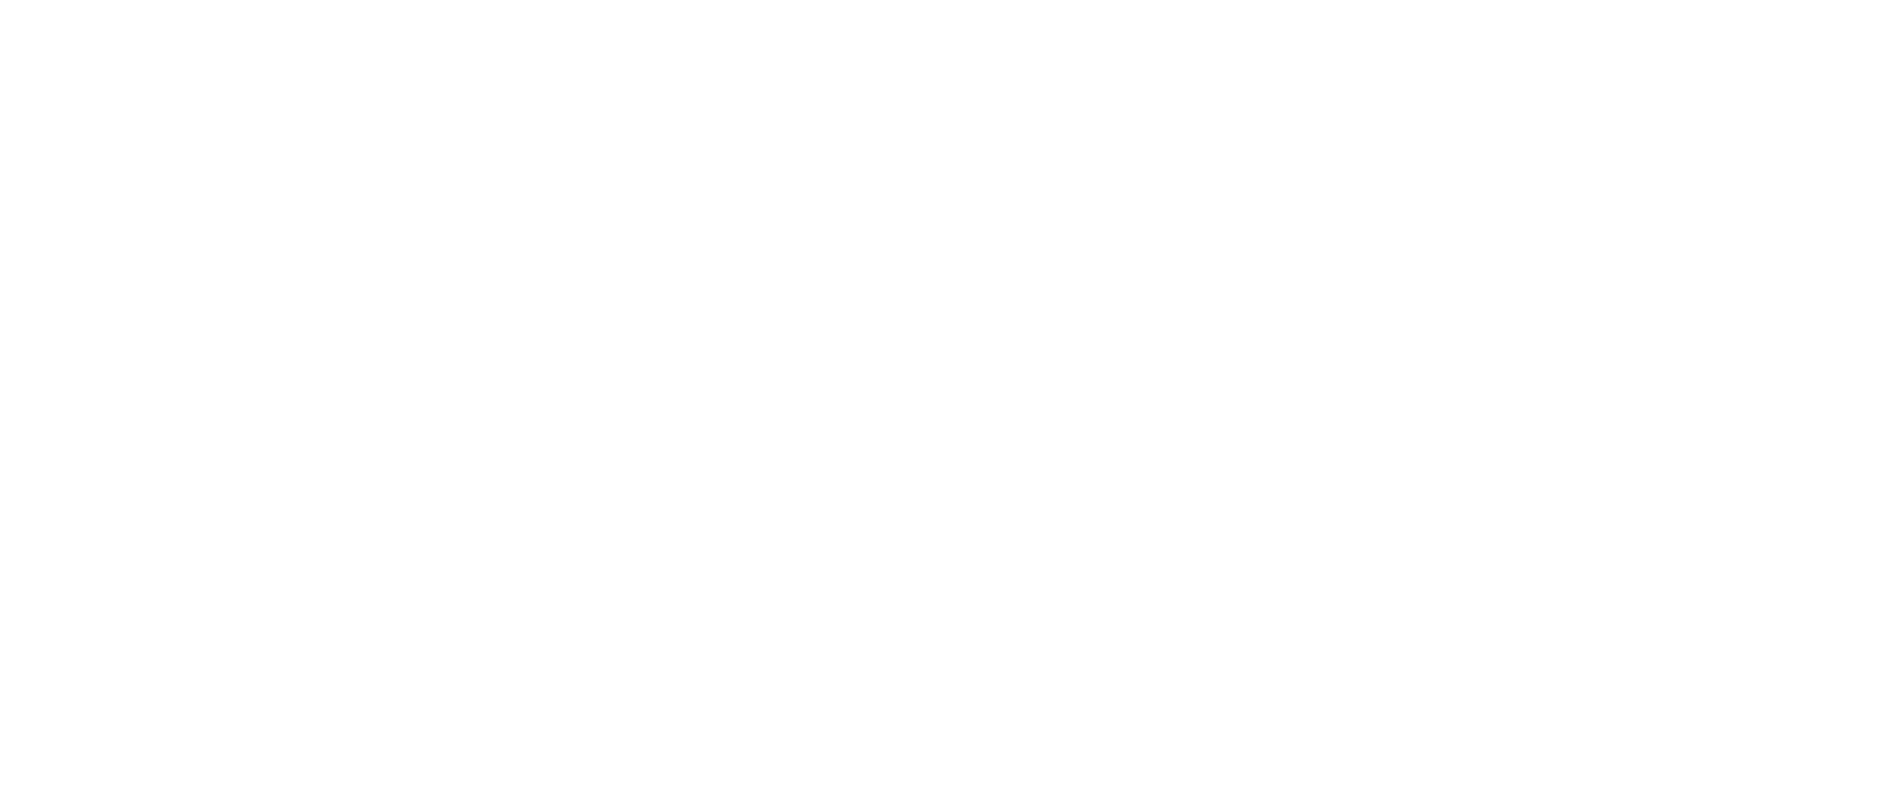 Hire Photographers for Weddings